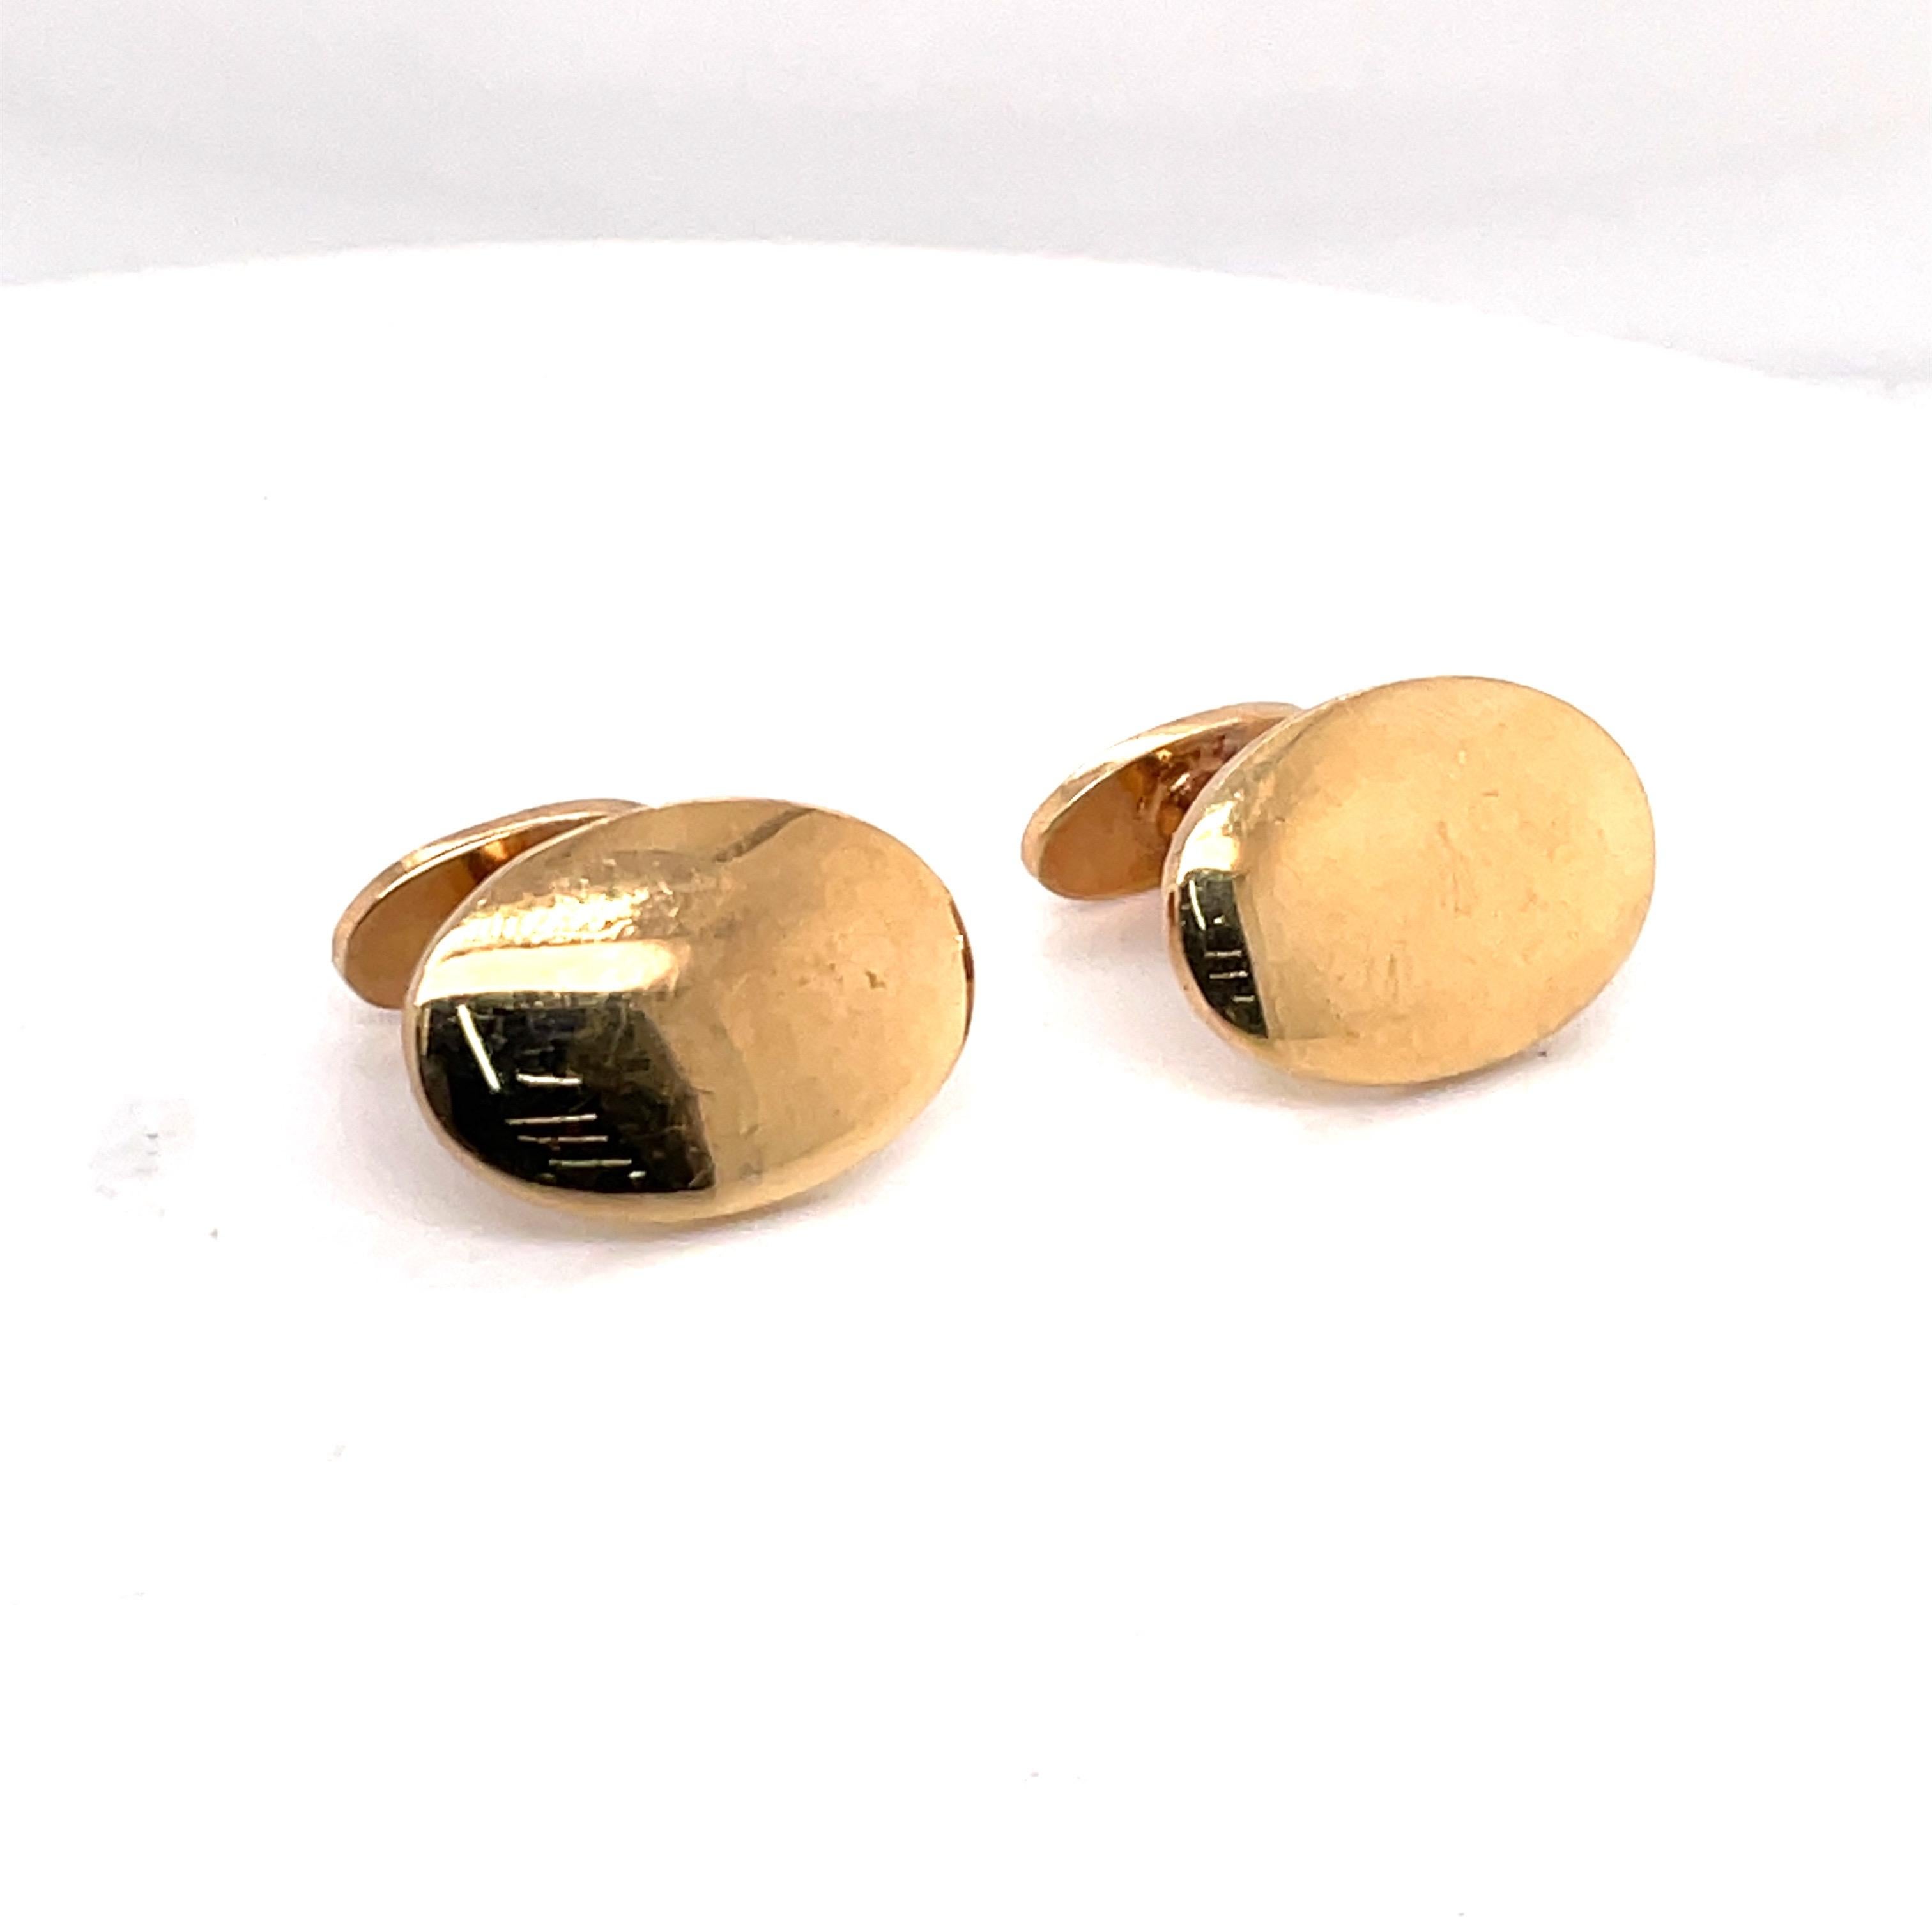 Tiffany & Co gents cufflinks crafted in 14 karat yellow gold weighing 9.9 grams.
Great for Father's Day!